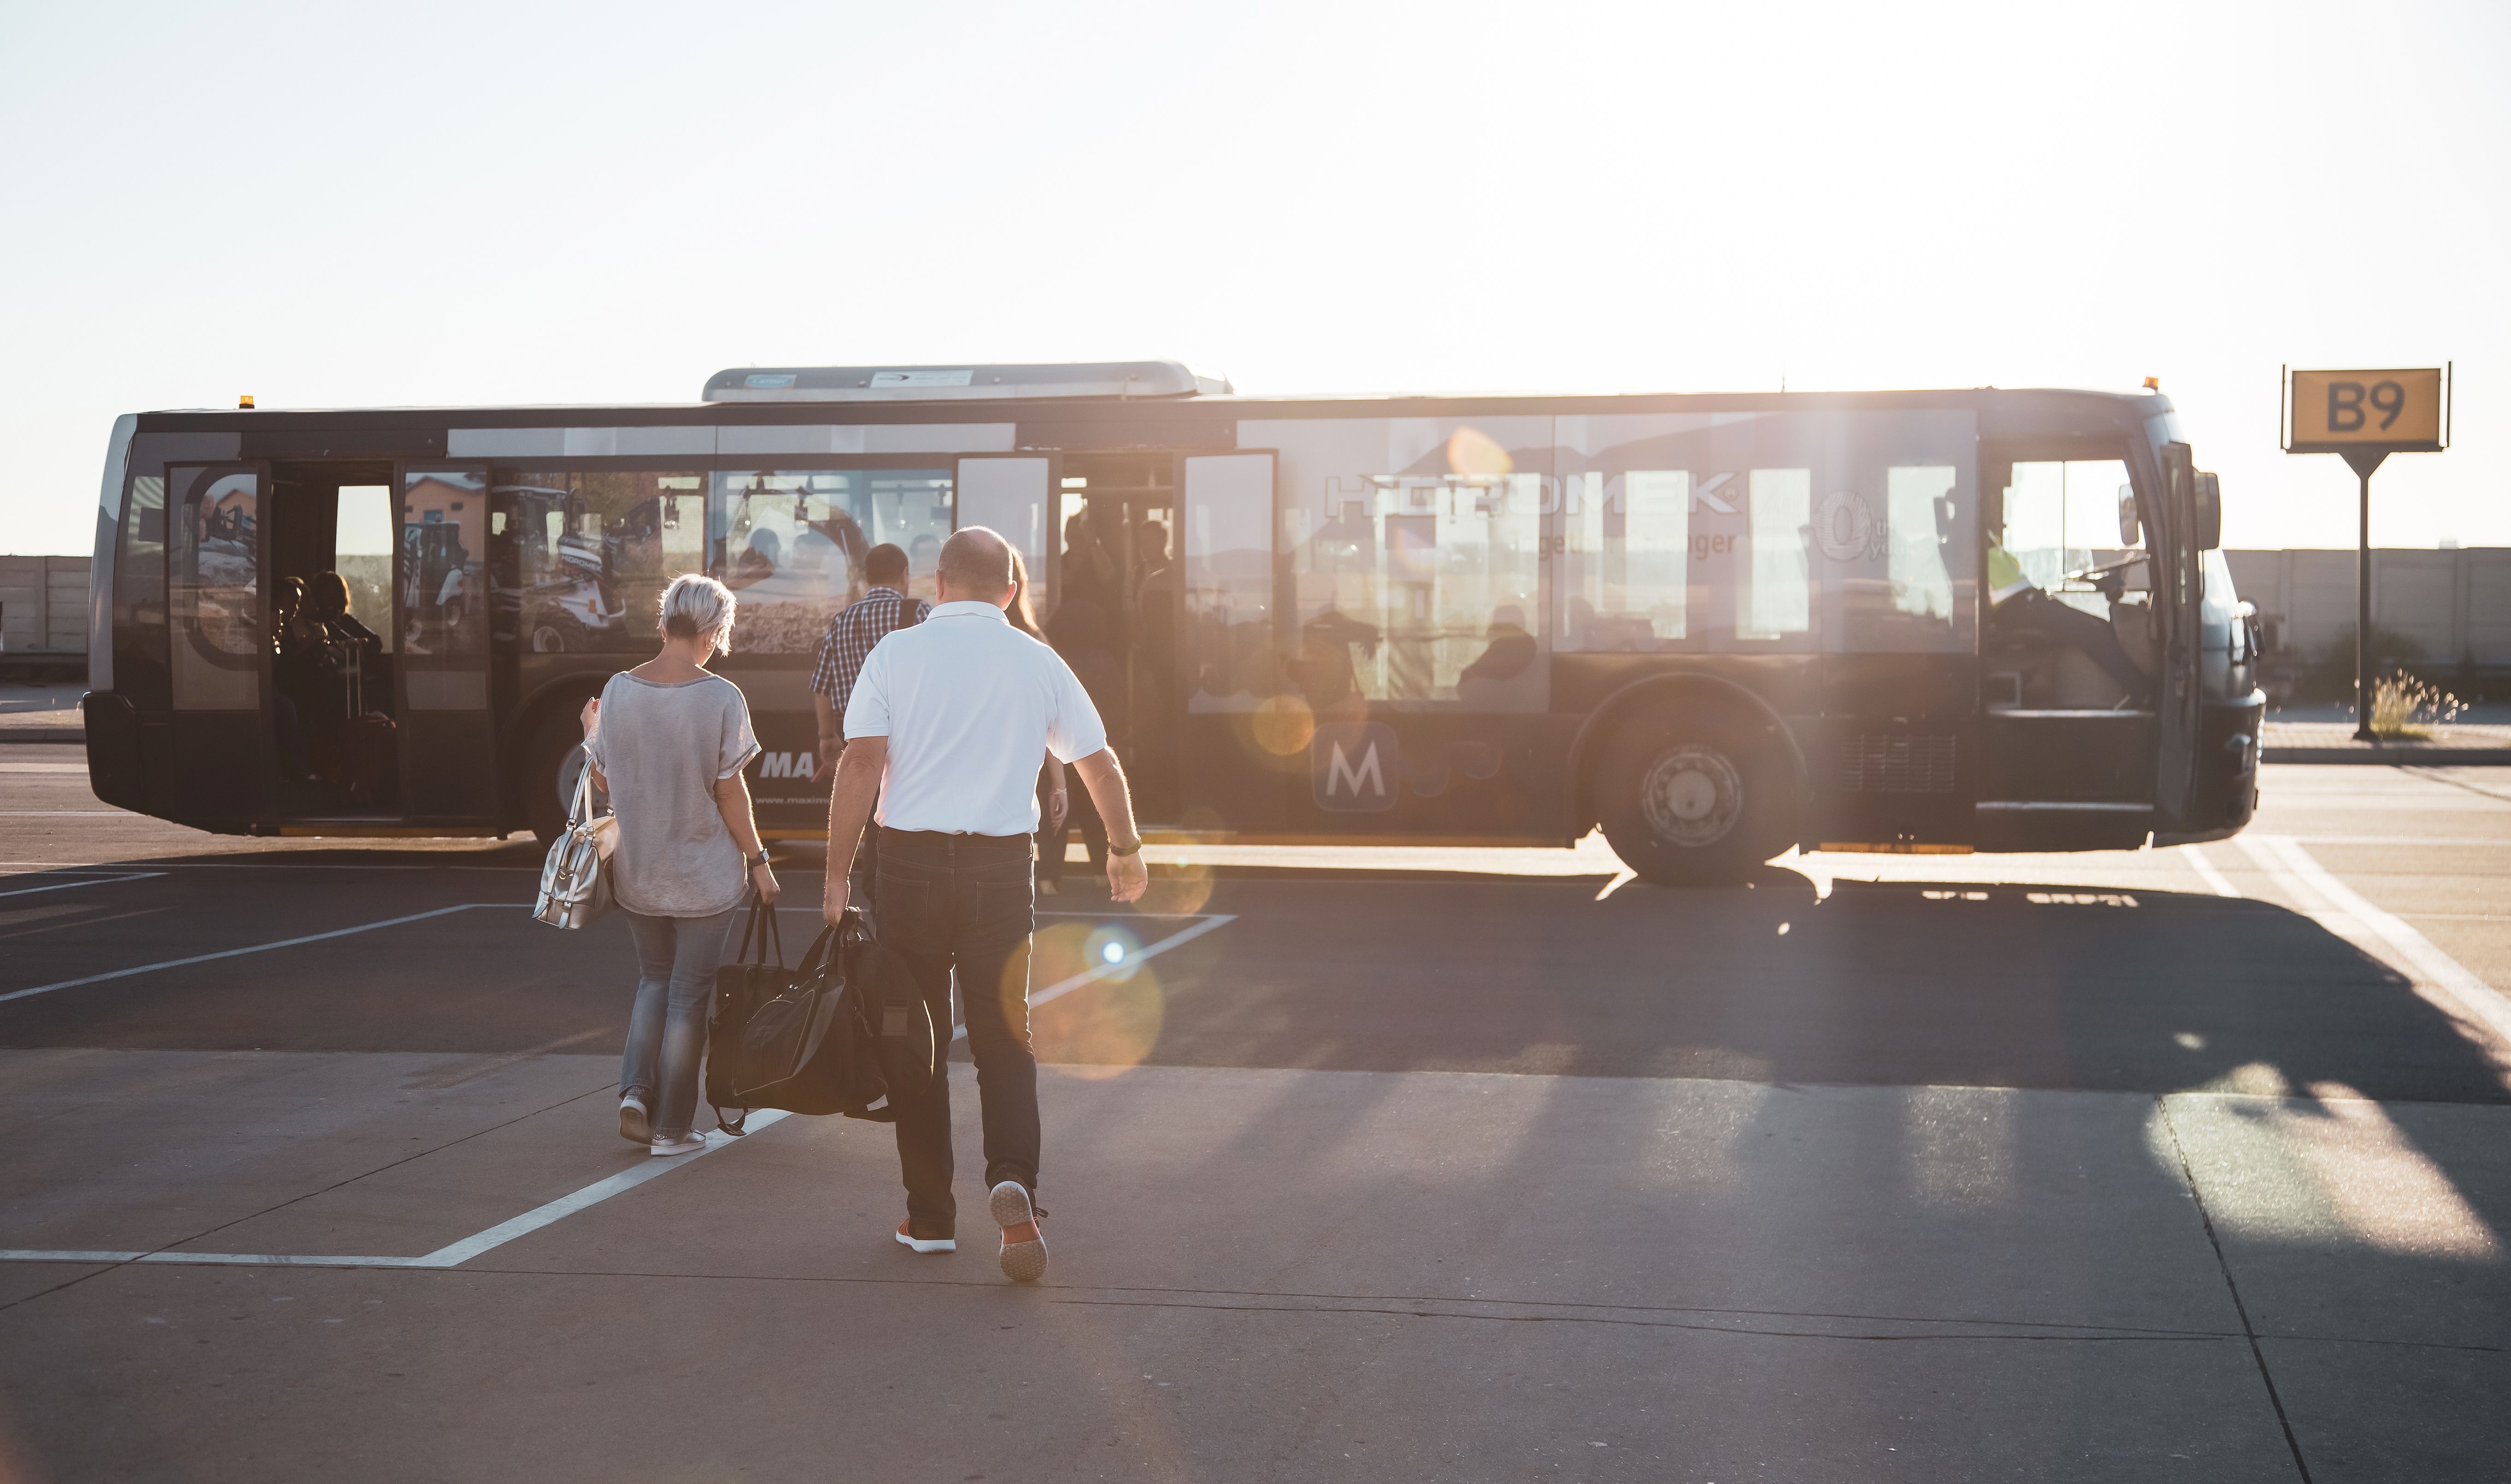 shutterstock_1330916207 - stock photo of airport bus with pilot and passenger boarding